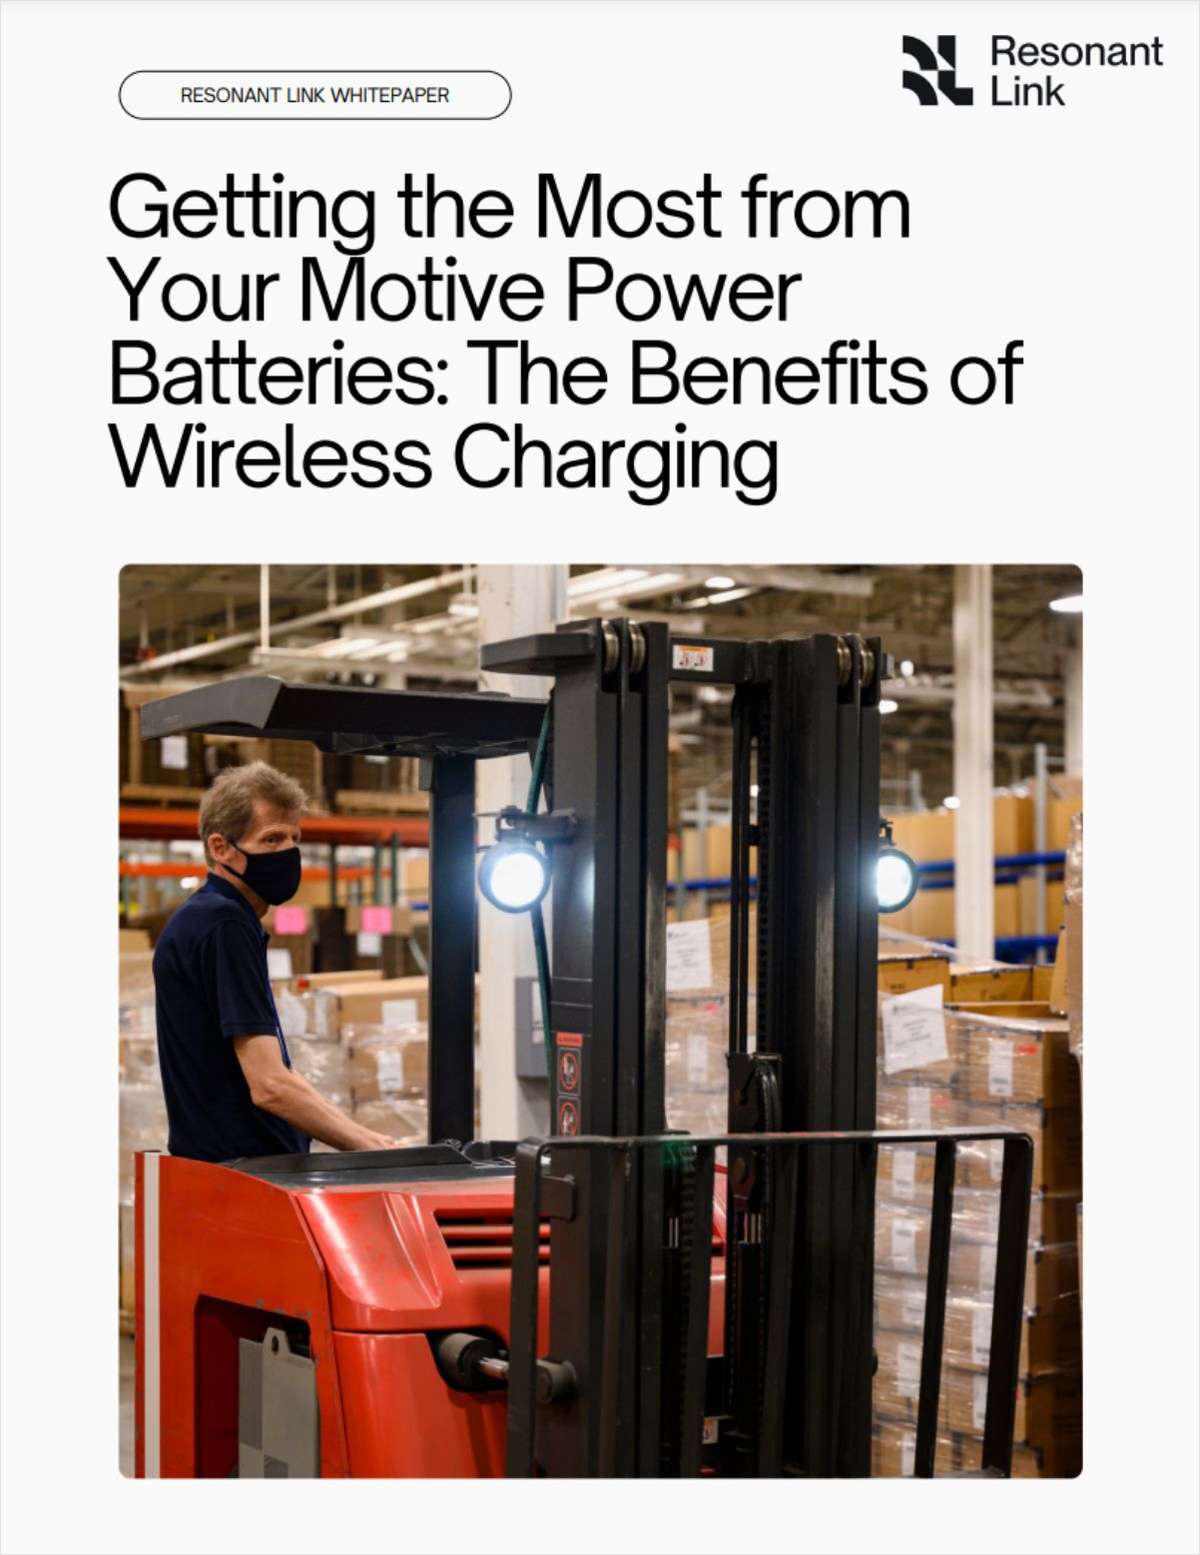 Getting the Most from Your Motive Power Batteries: The Benefits of Wireless Charging